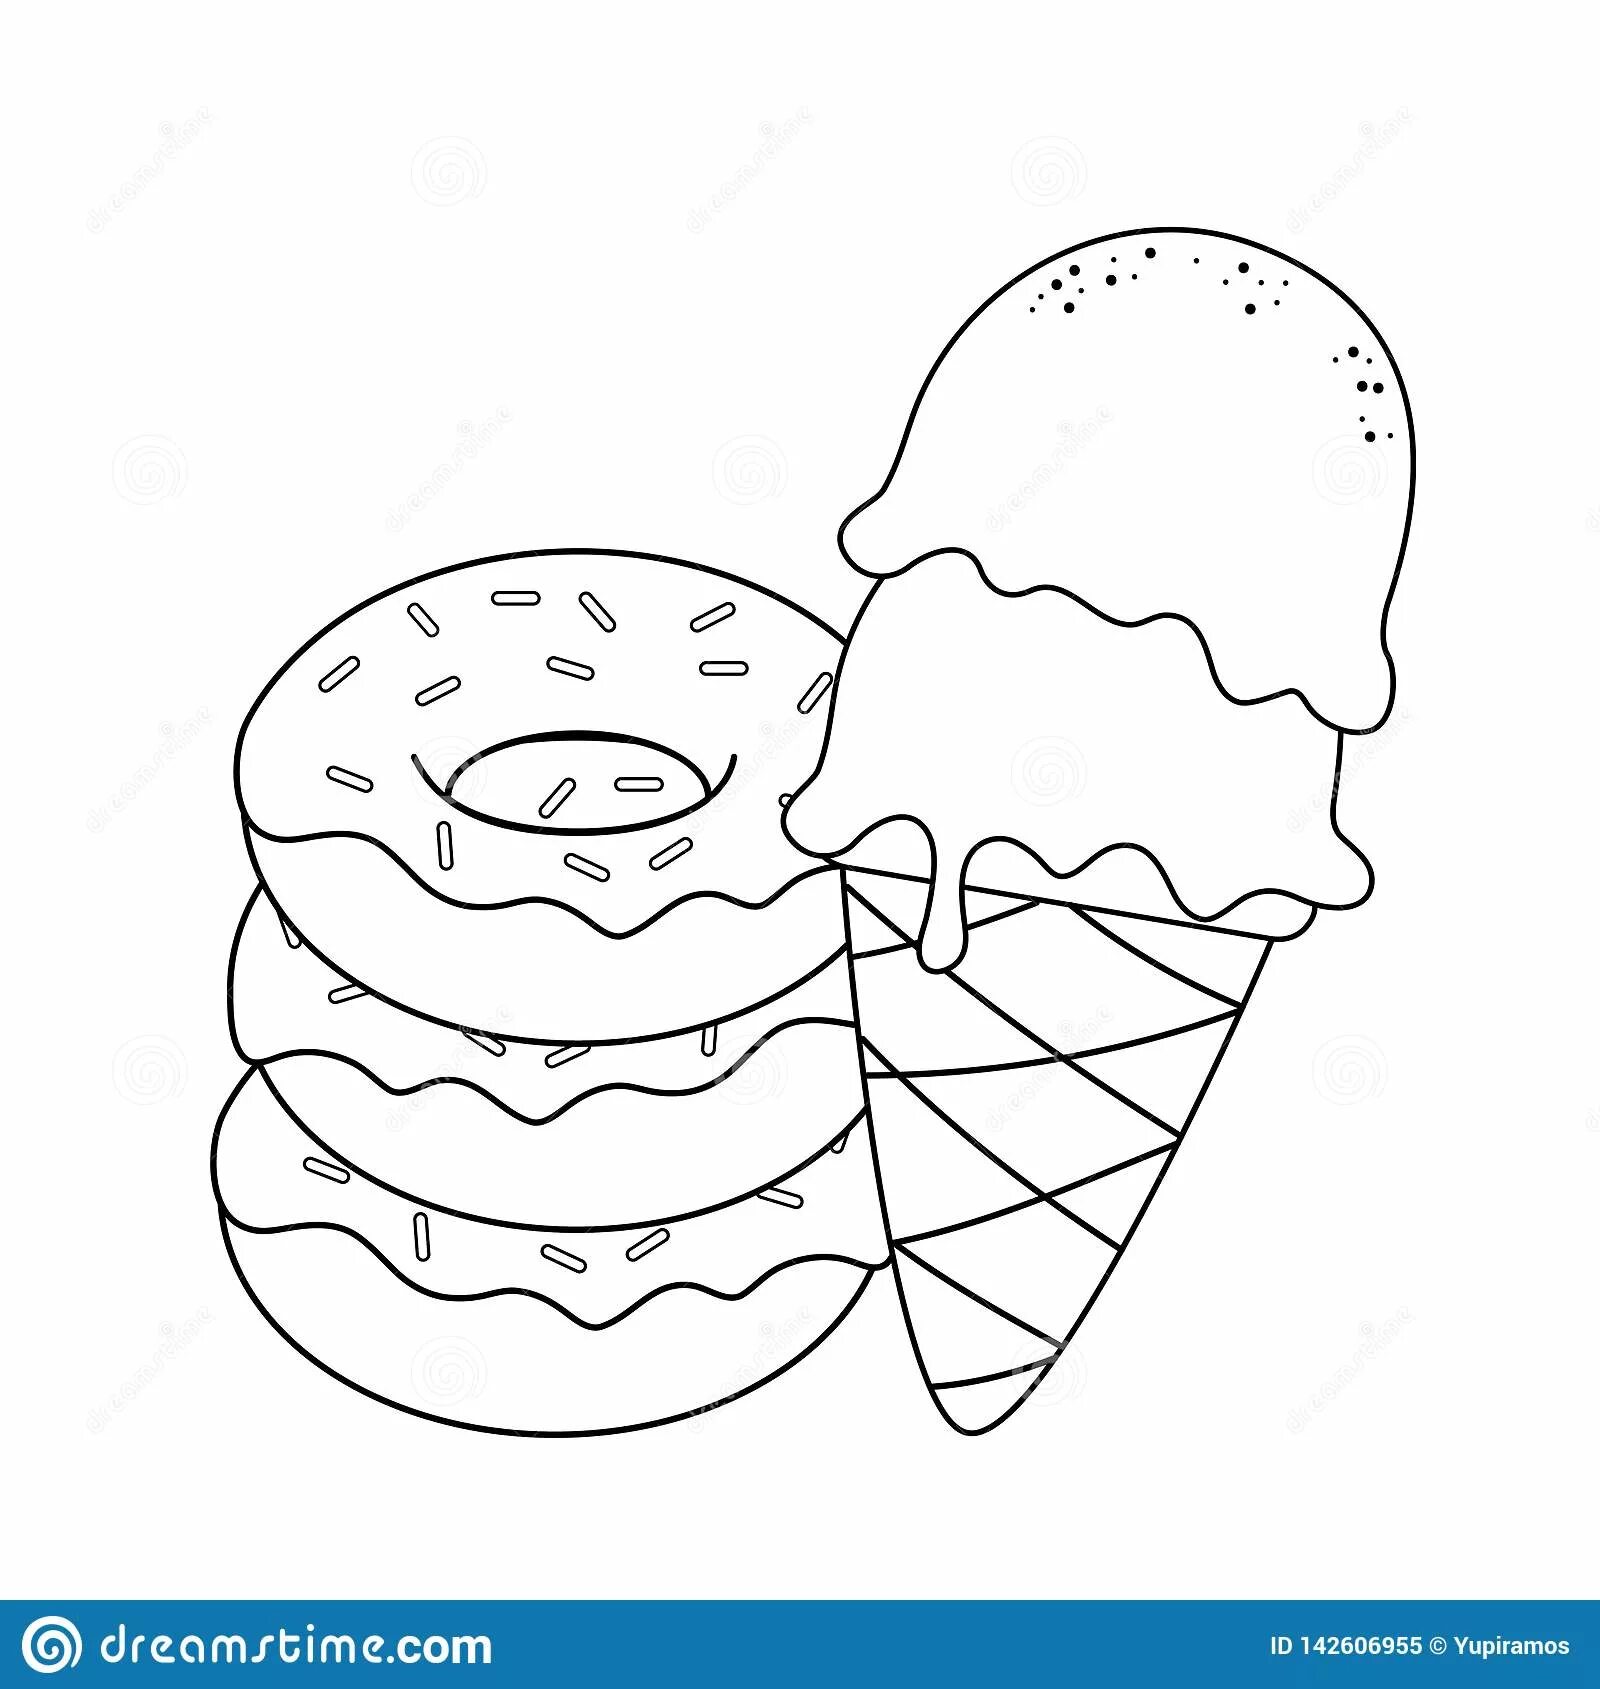 Donuts and ice cream #2